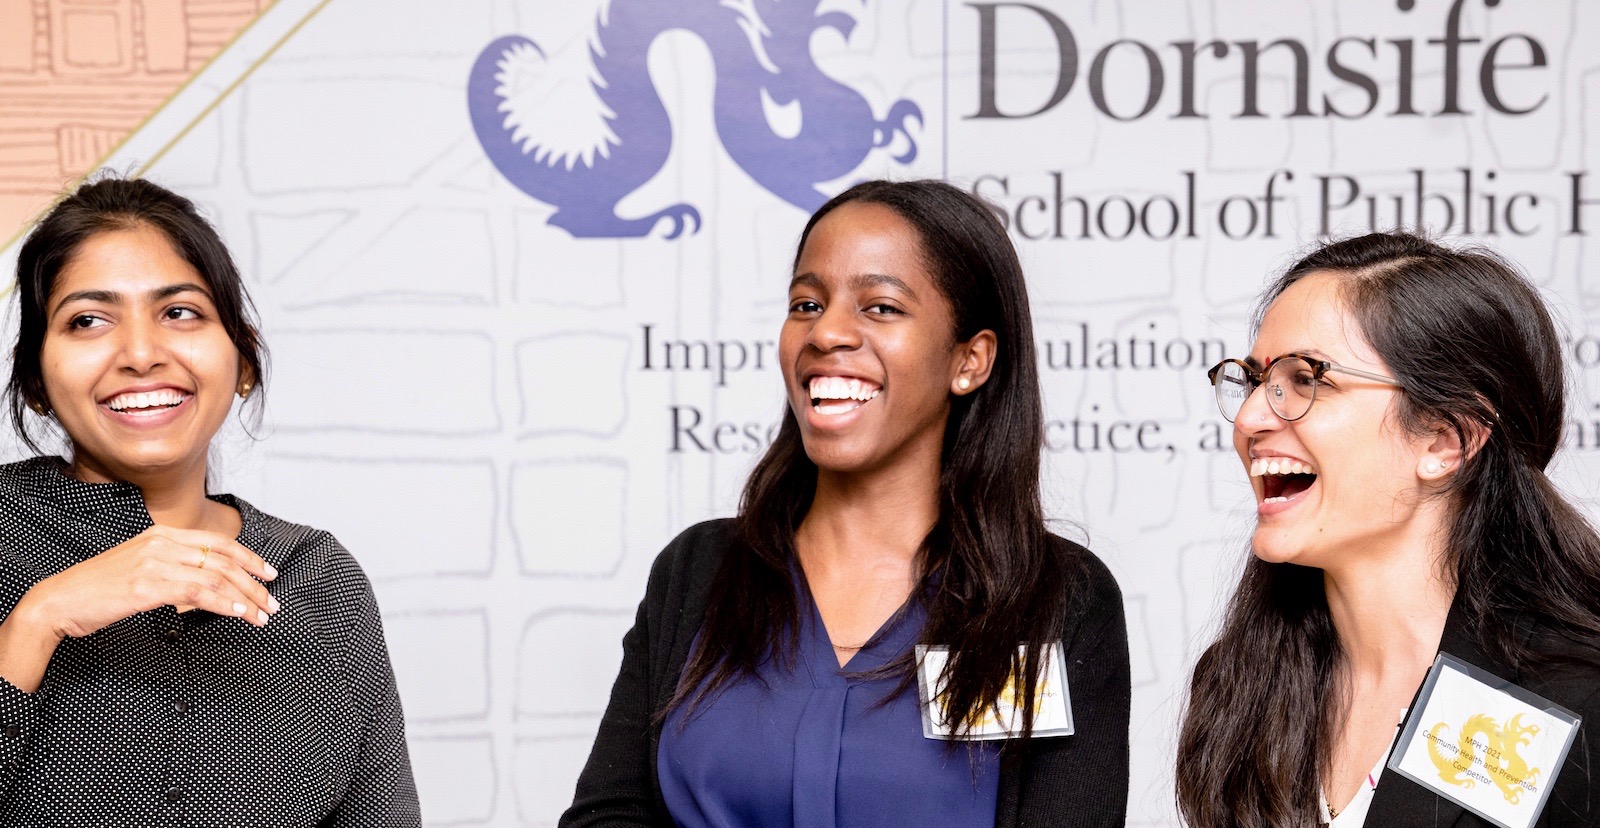 Dornsife students share a laugh after competing in the school's annual case competition